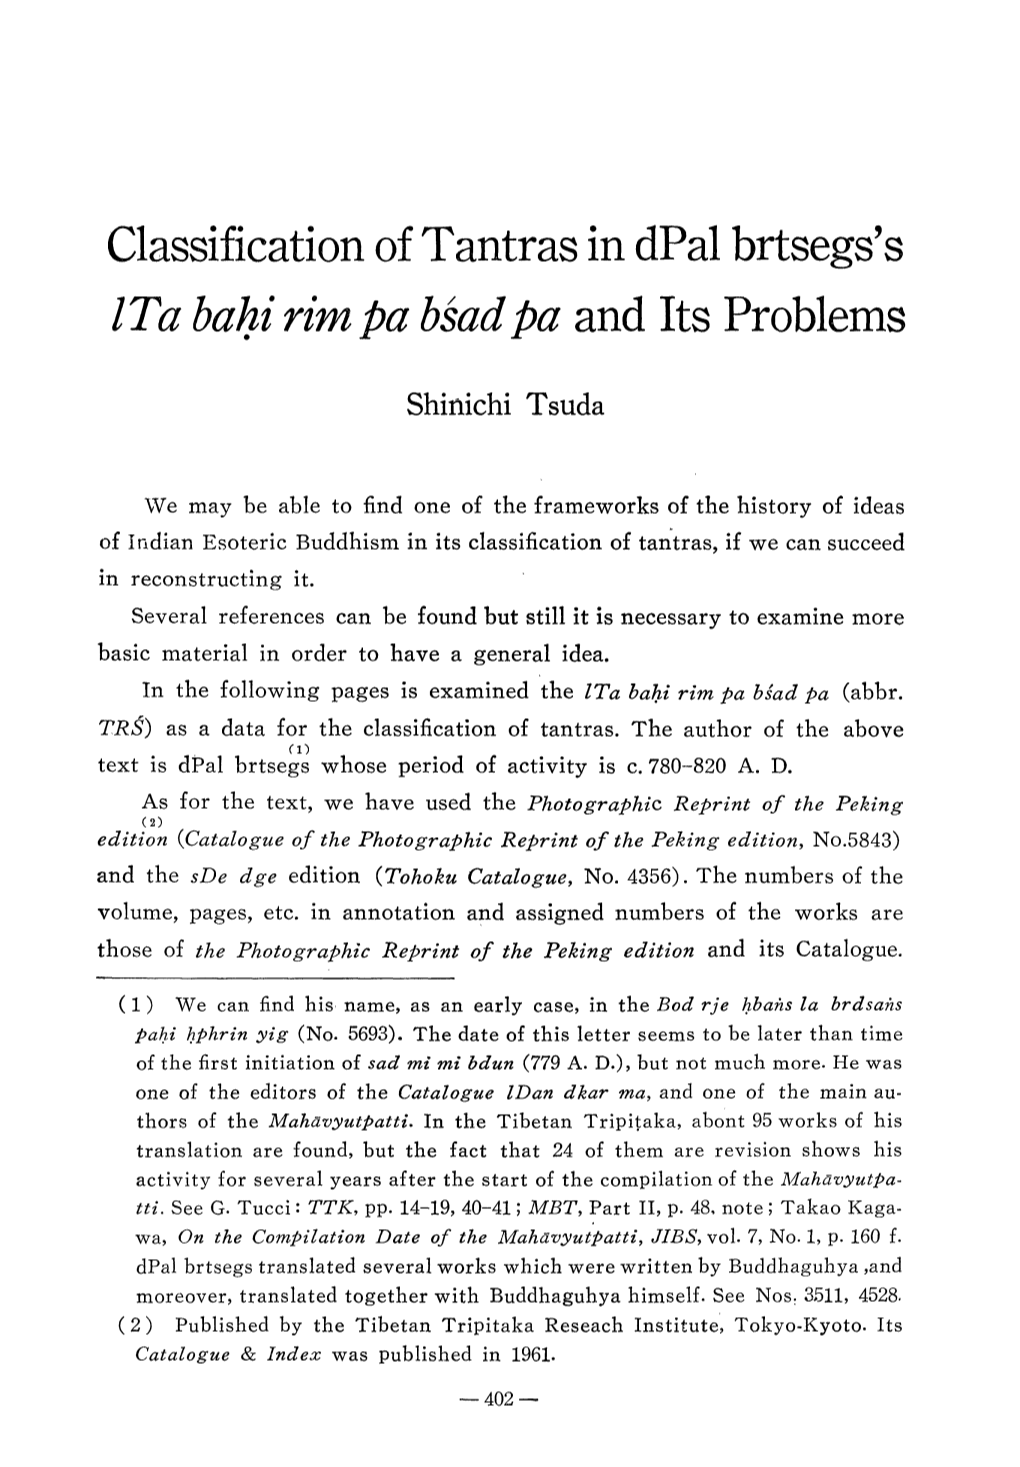 Classification of Tantras in Dpal Brtsegs's Ita Bahi Rim a Bthdpa and Its Problems